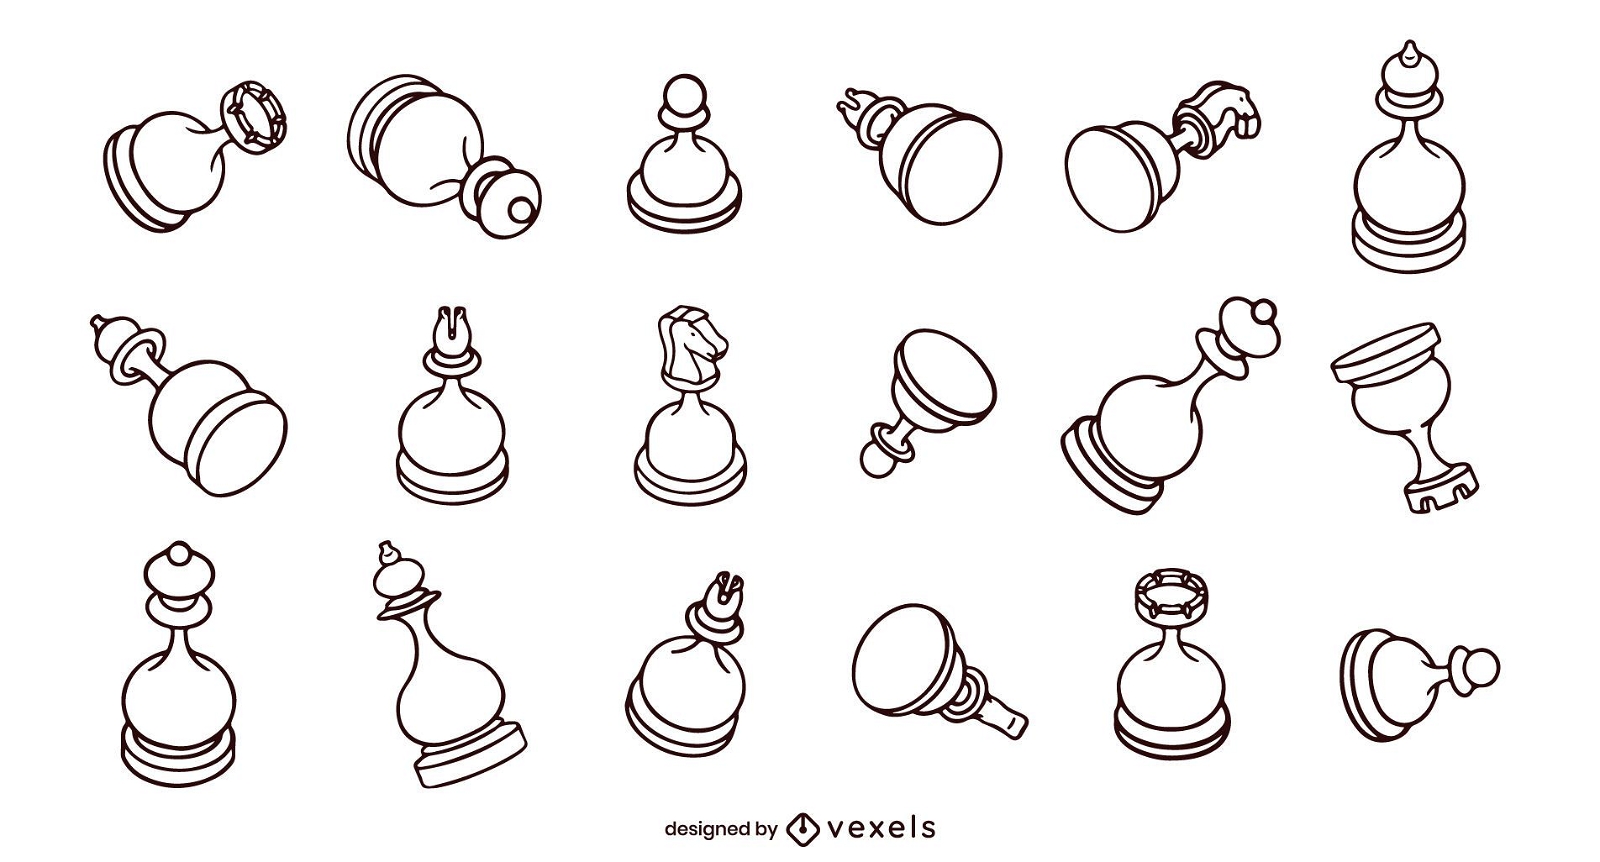 Rounded chess pieces set stroke